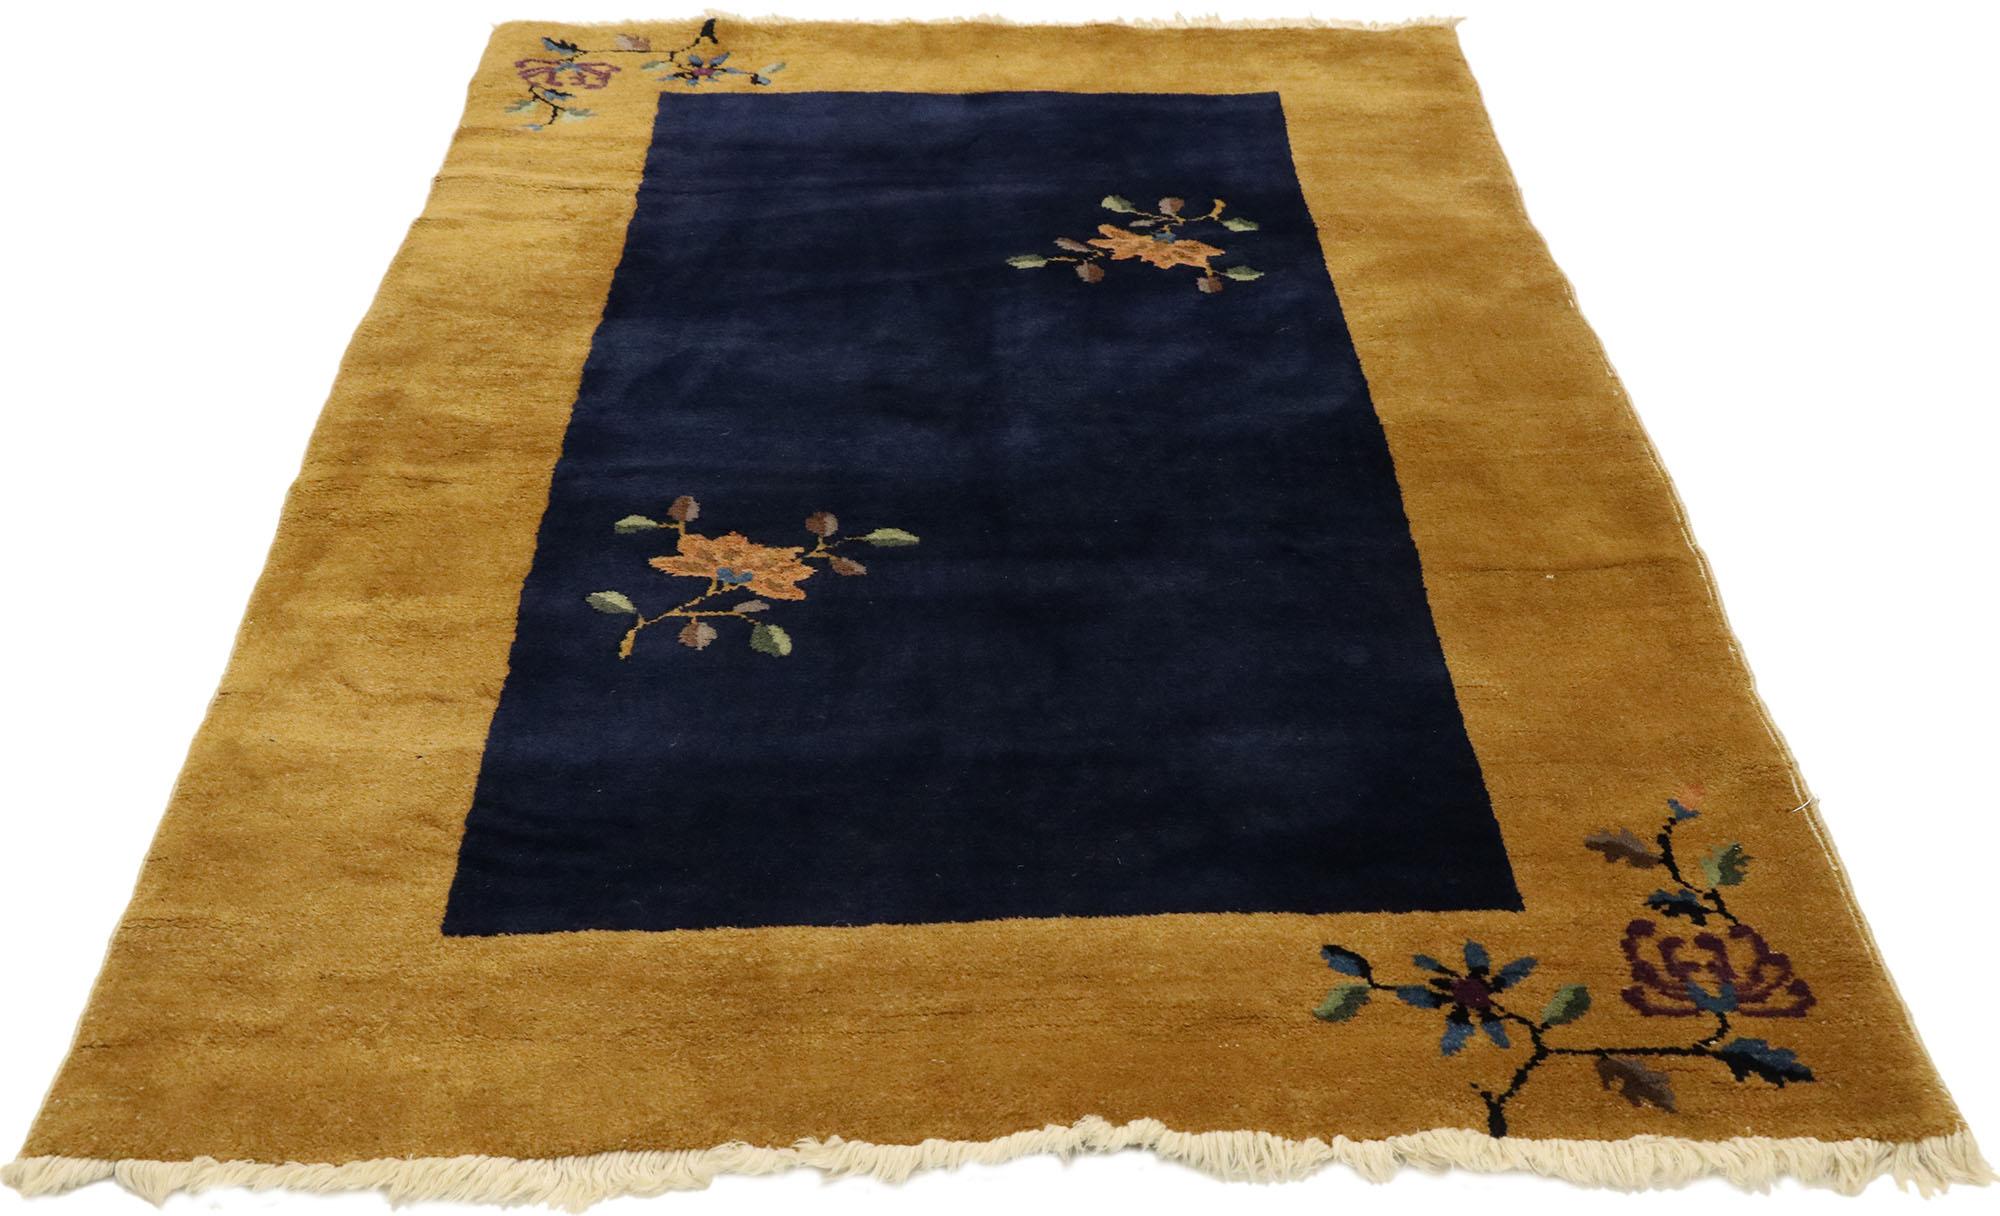 Ming Antique Chinese Art Deco Rug with Minimalist Qing Dynasty Style